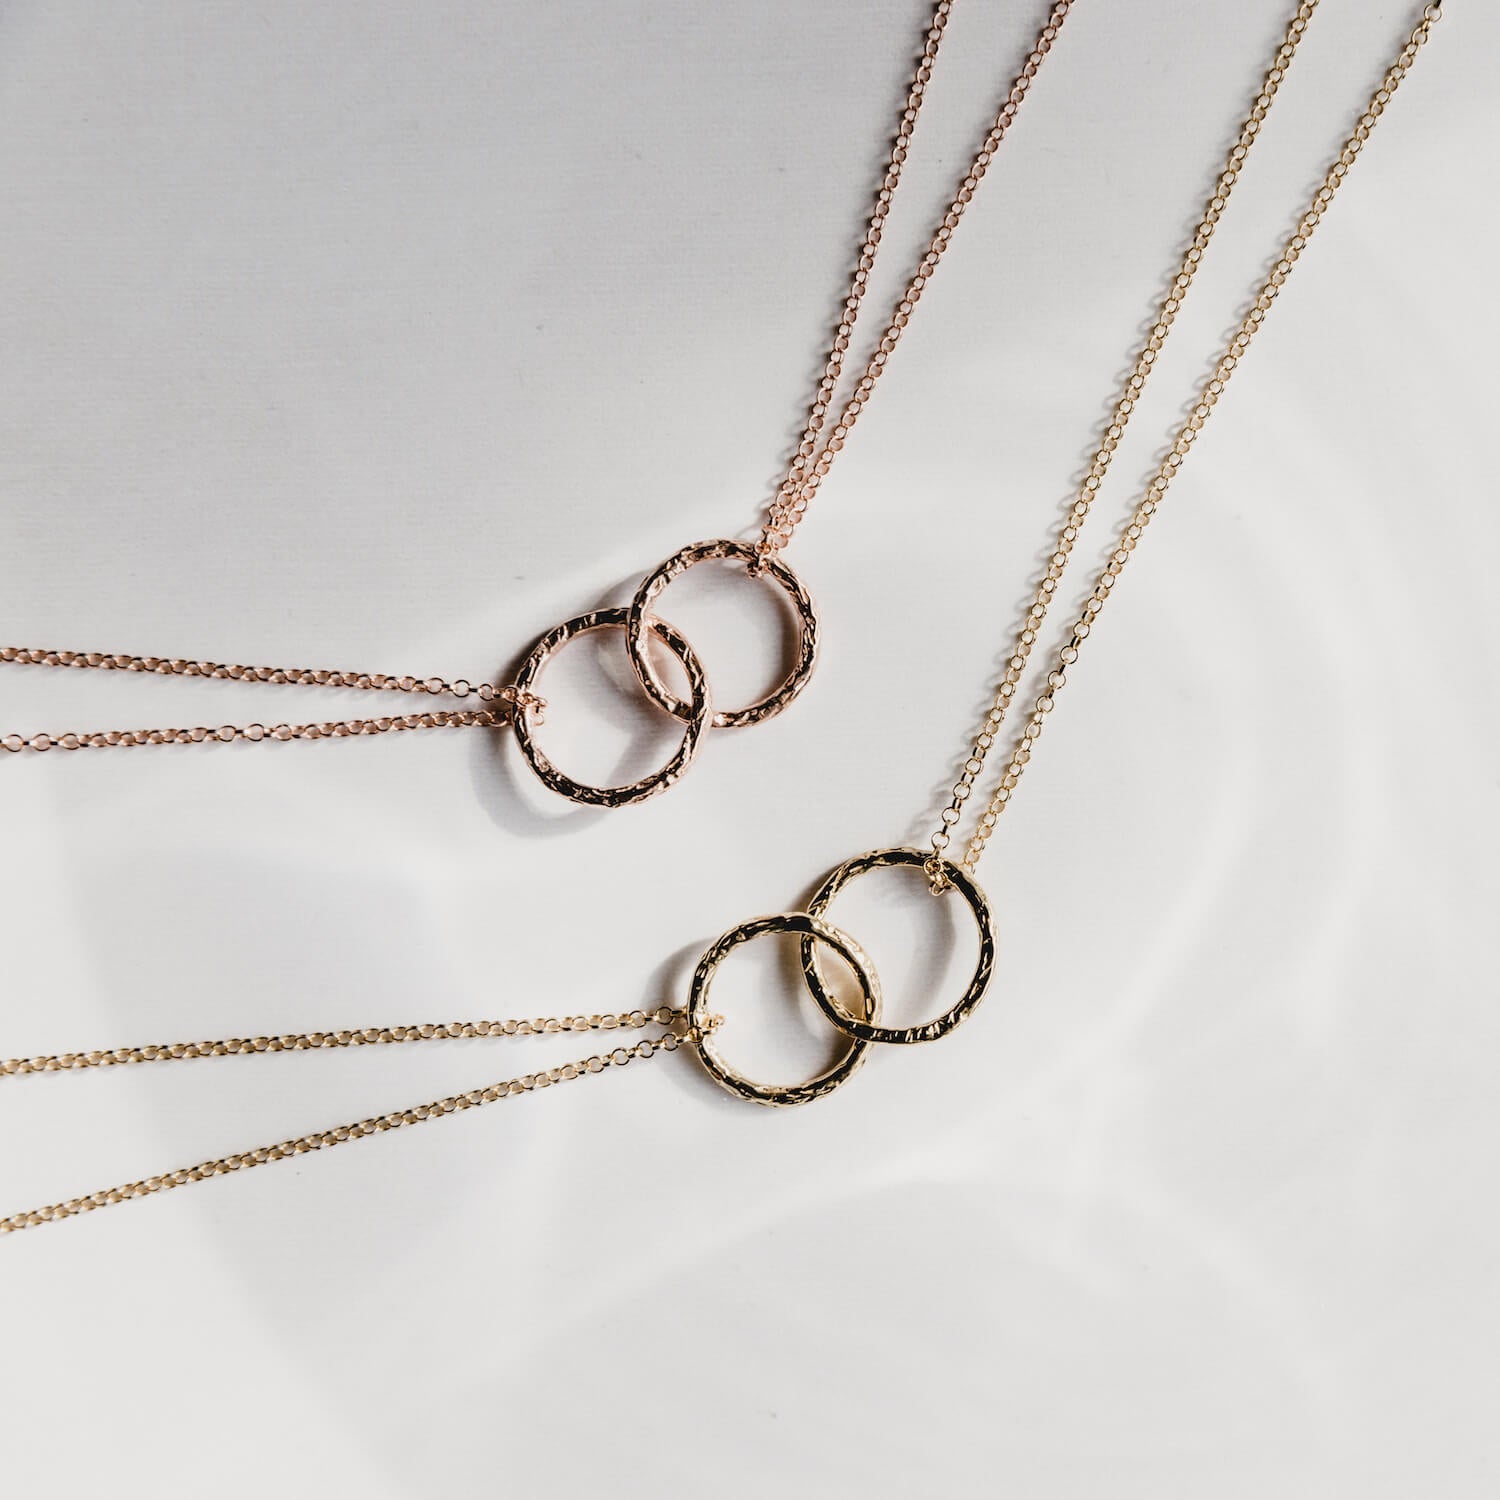 Close up of two pendants with intertwined rings, one in gold, one in rose gold